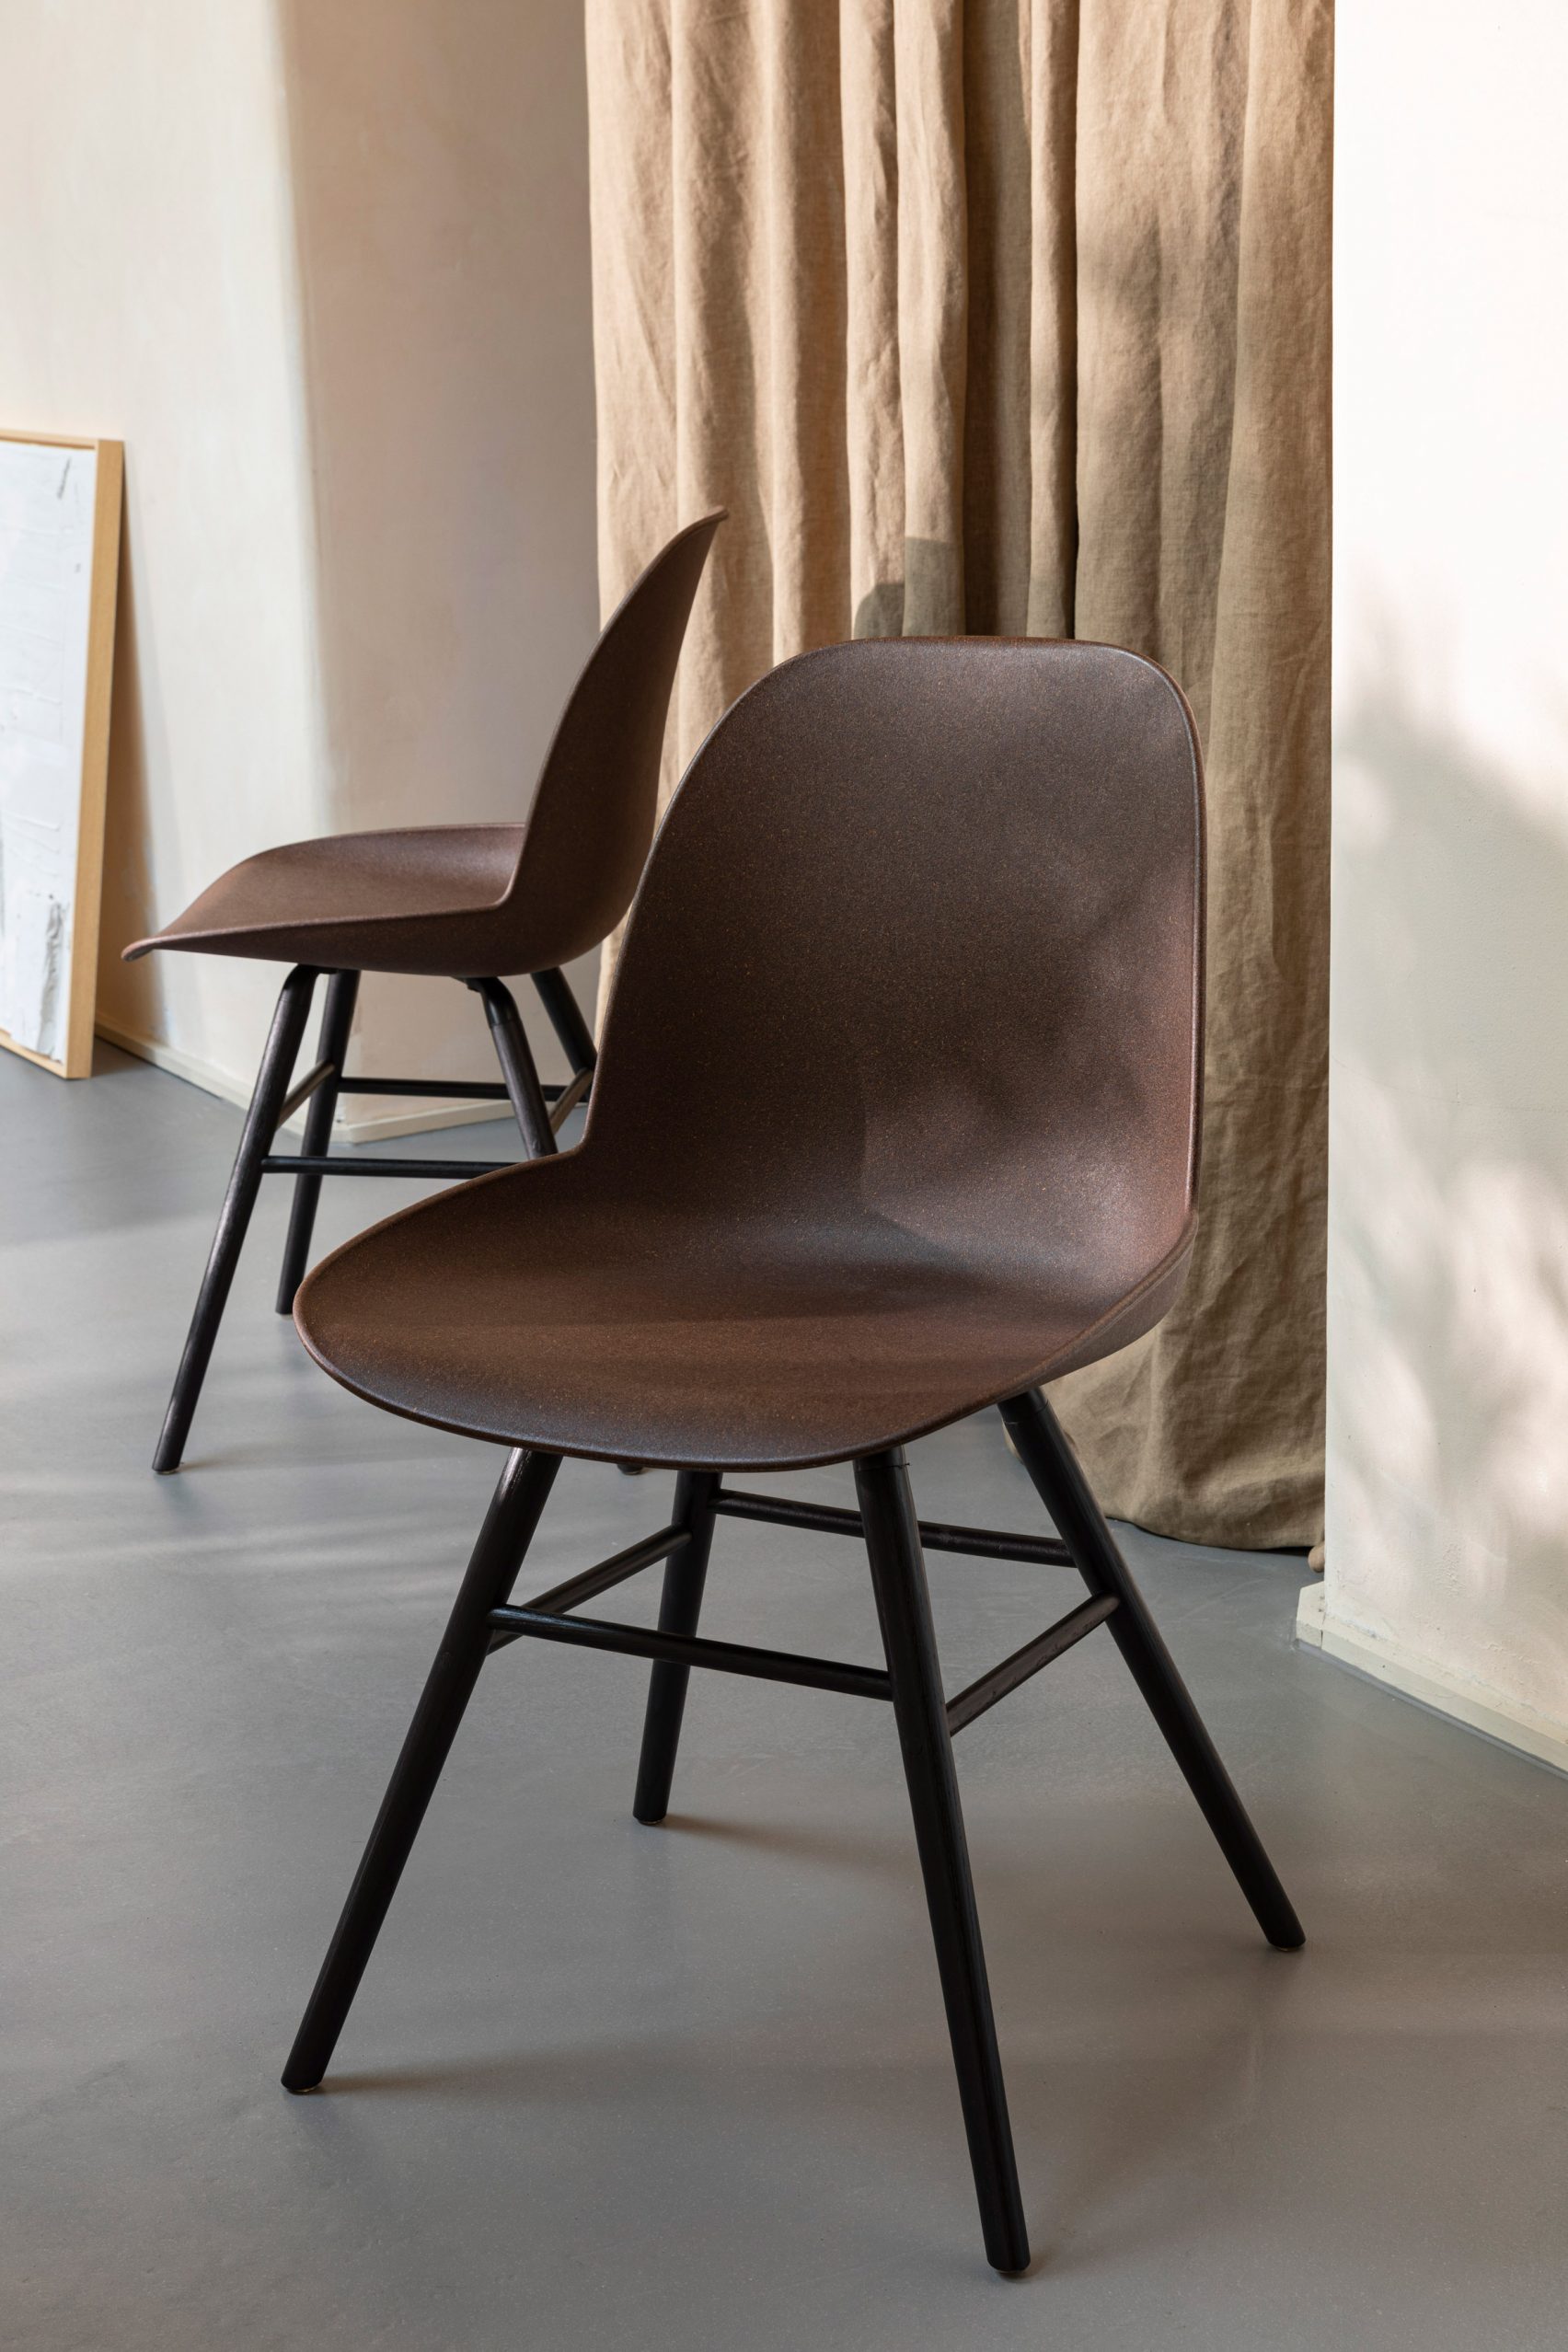 Two Albert Kuip Coffee chair presented at Maison & Objet